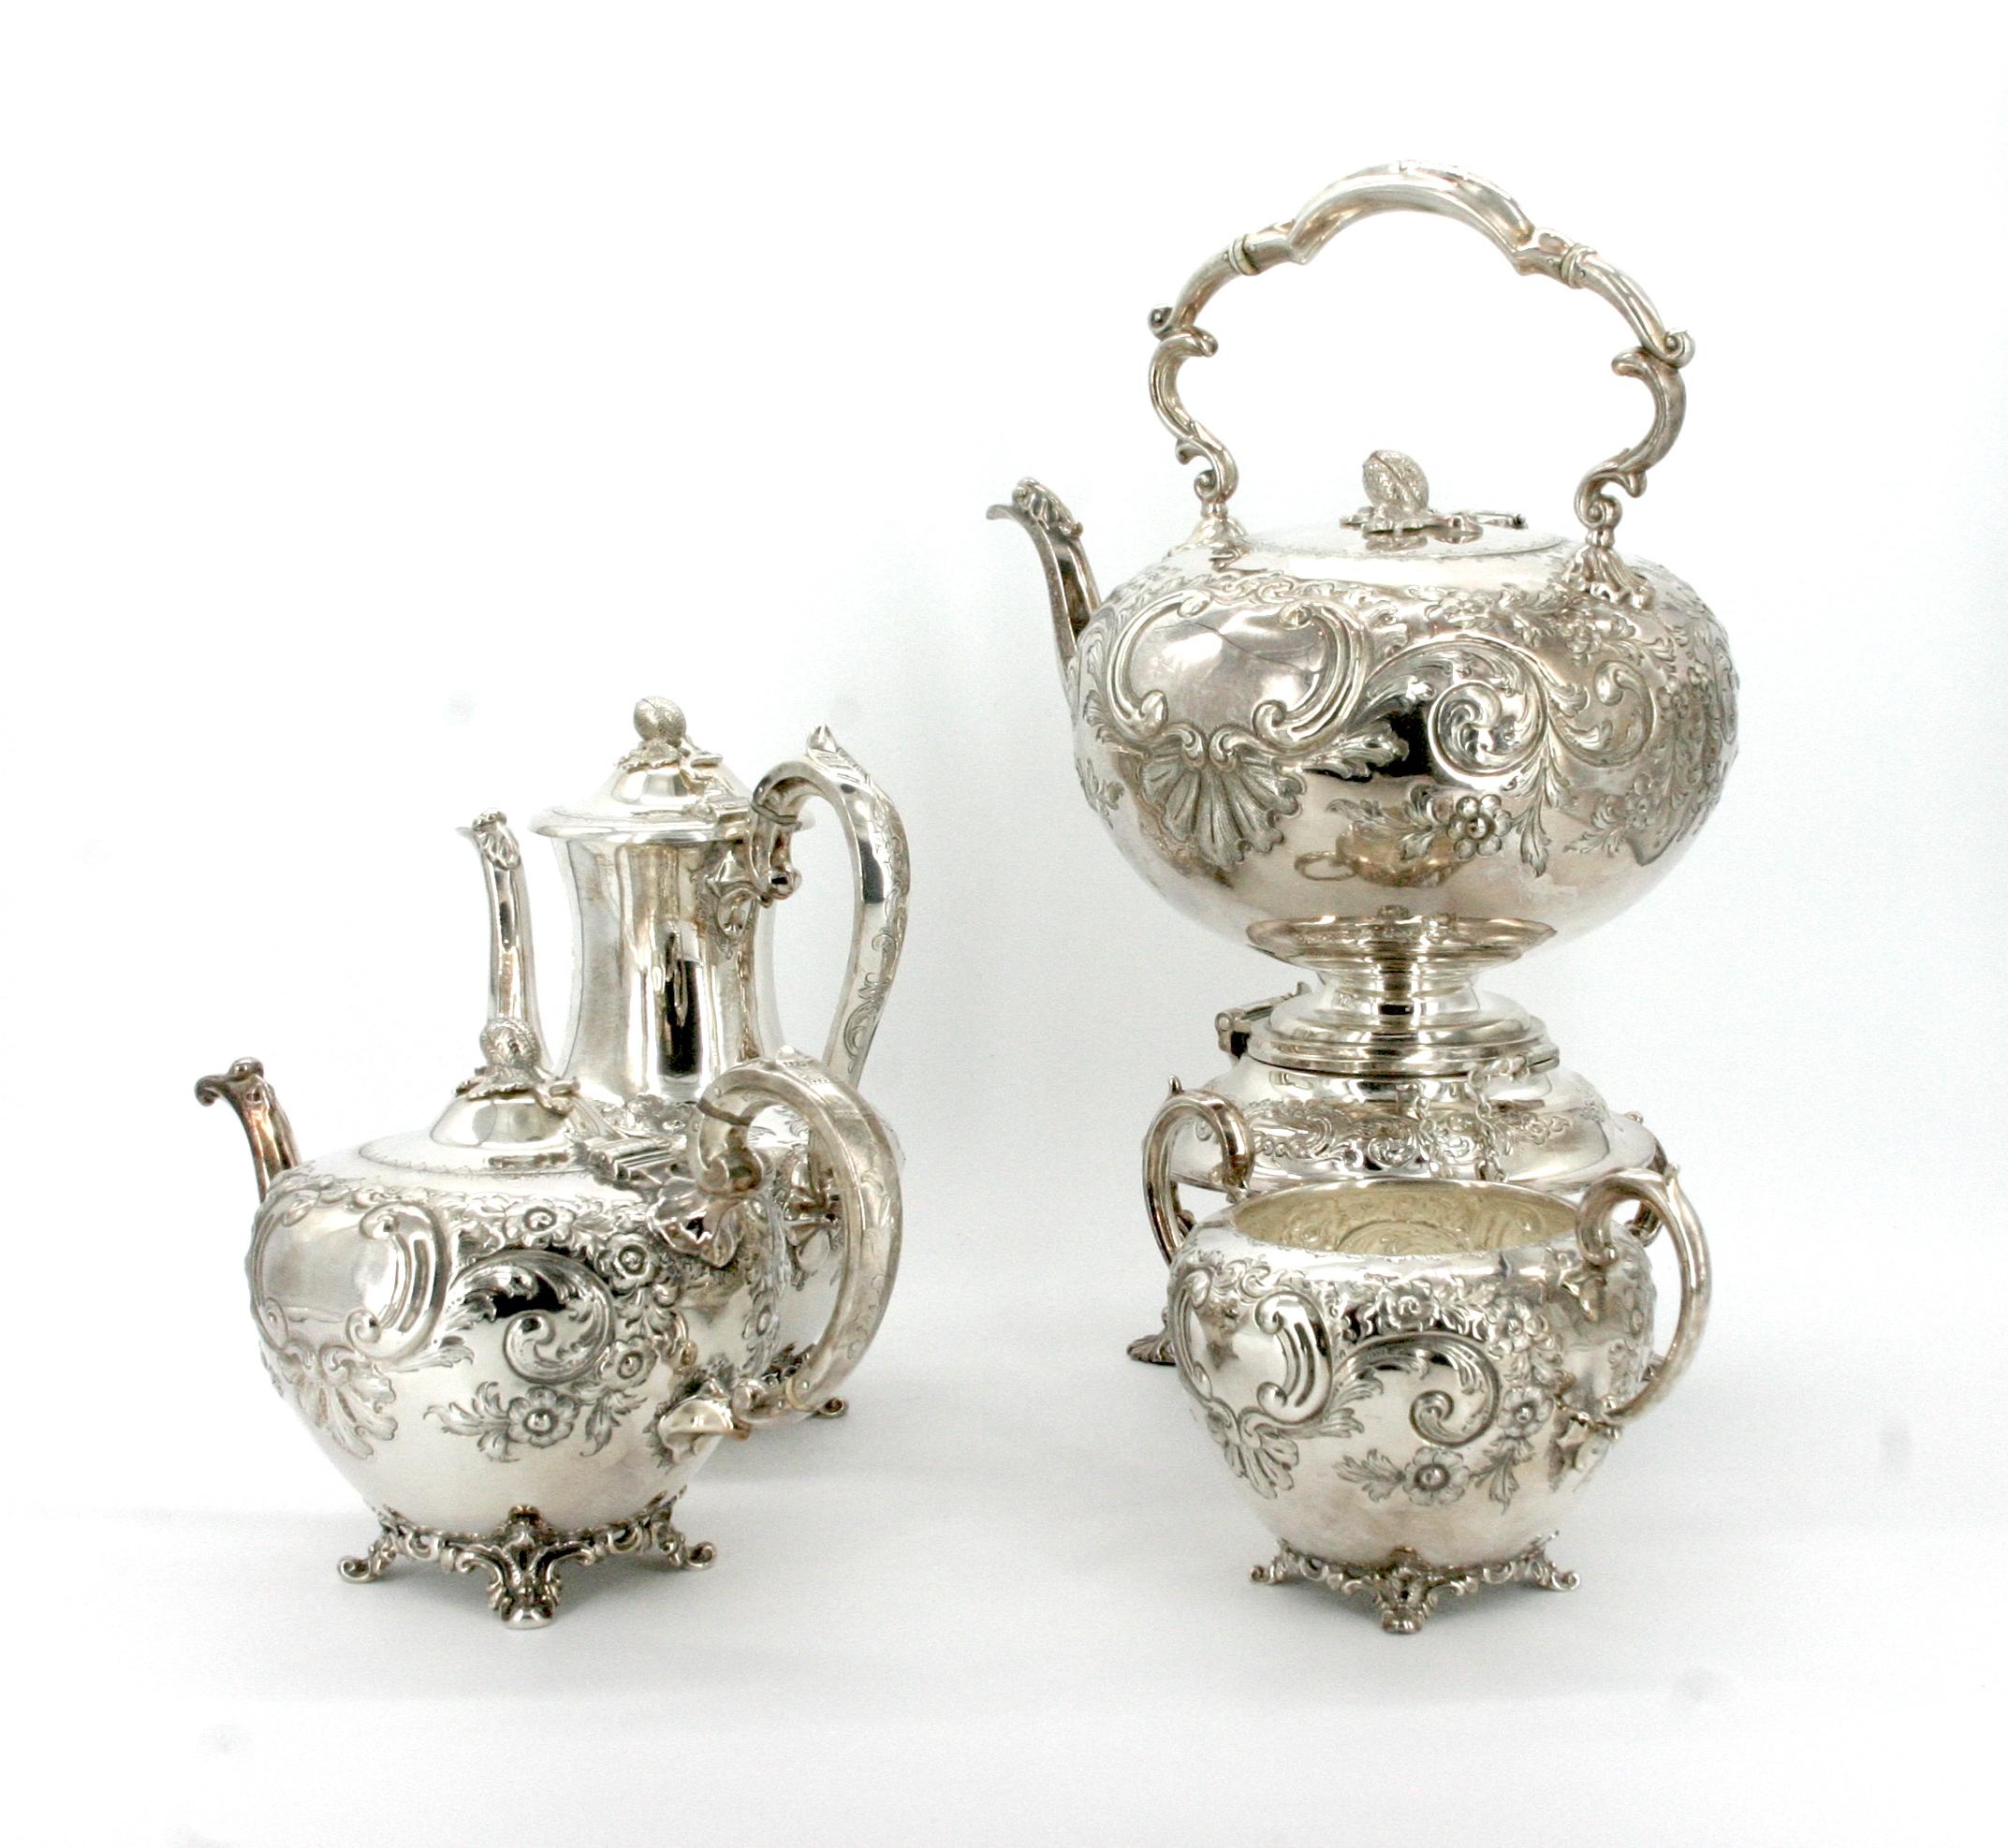 Early 19th century English Sheffield silver plate tableware five pieces tea/coffee service. The coffee/tea features intricate exterior floral details and paw. The set include a tall water kettle 16